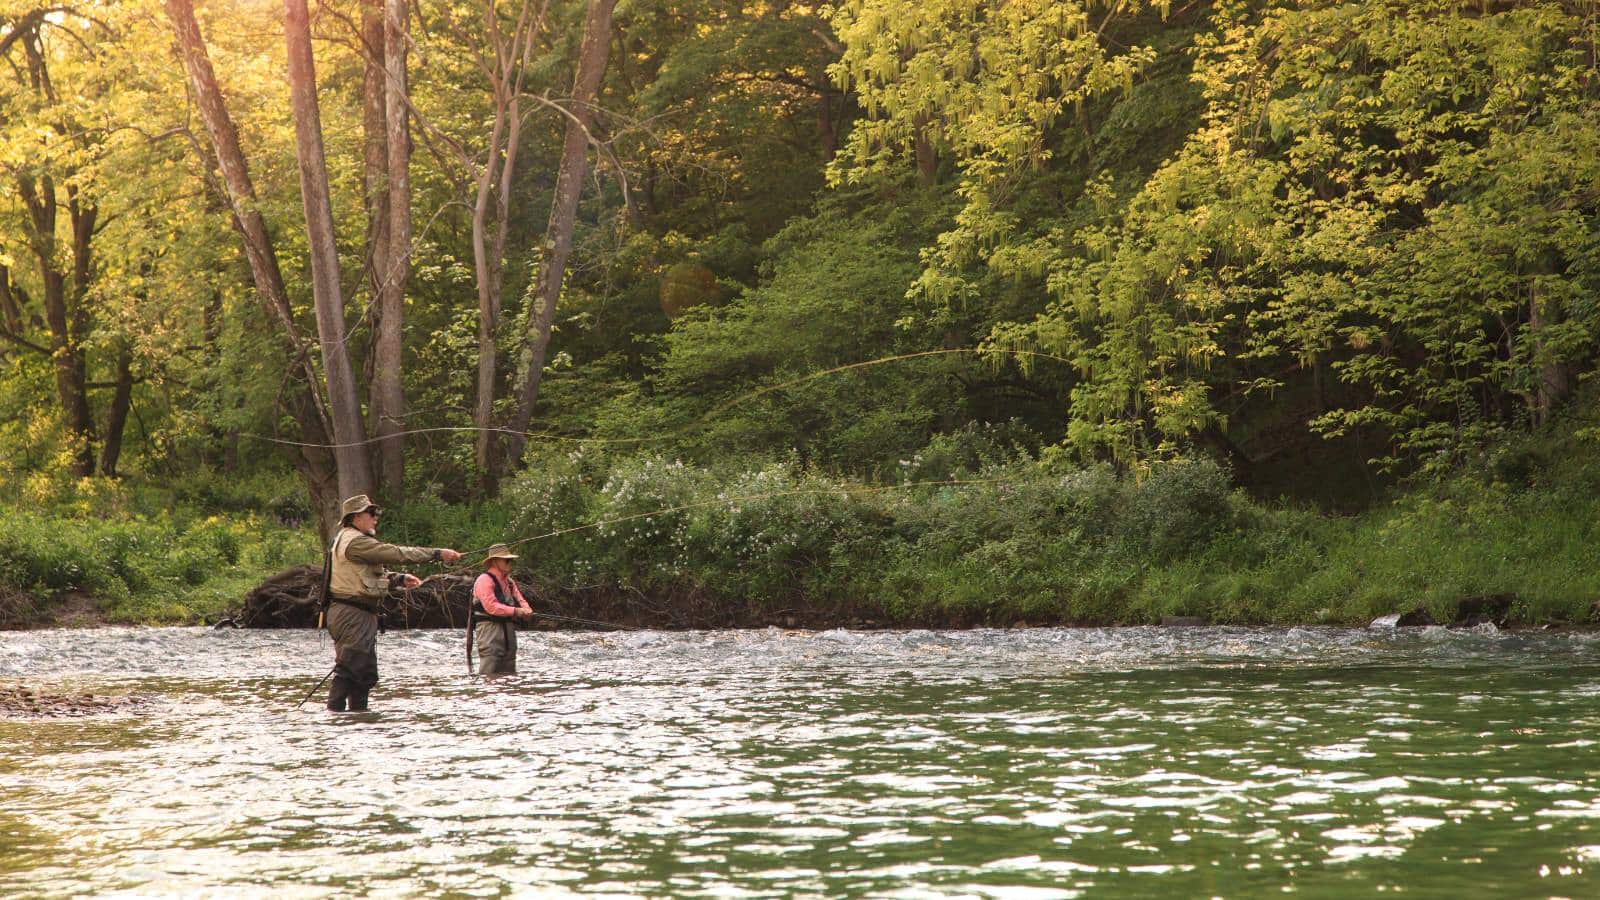 Two people fly fishing in the middle of a river with green trees in the background